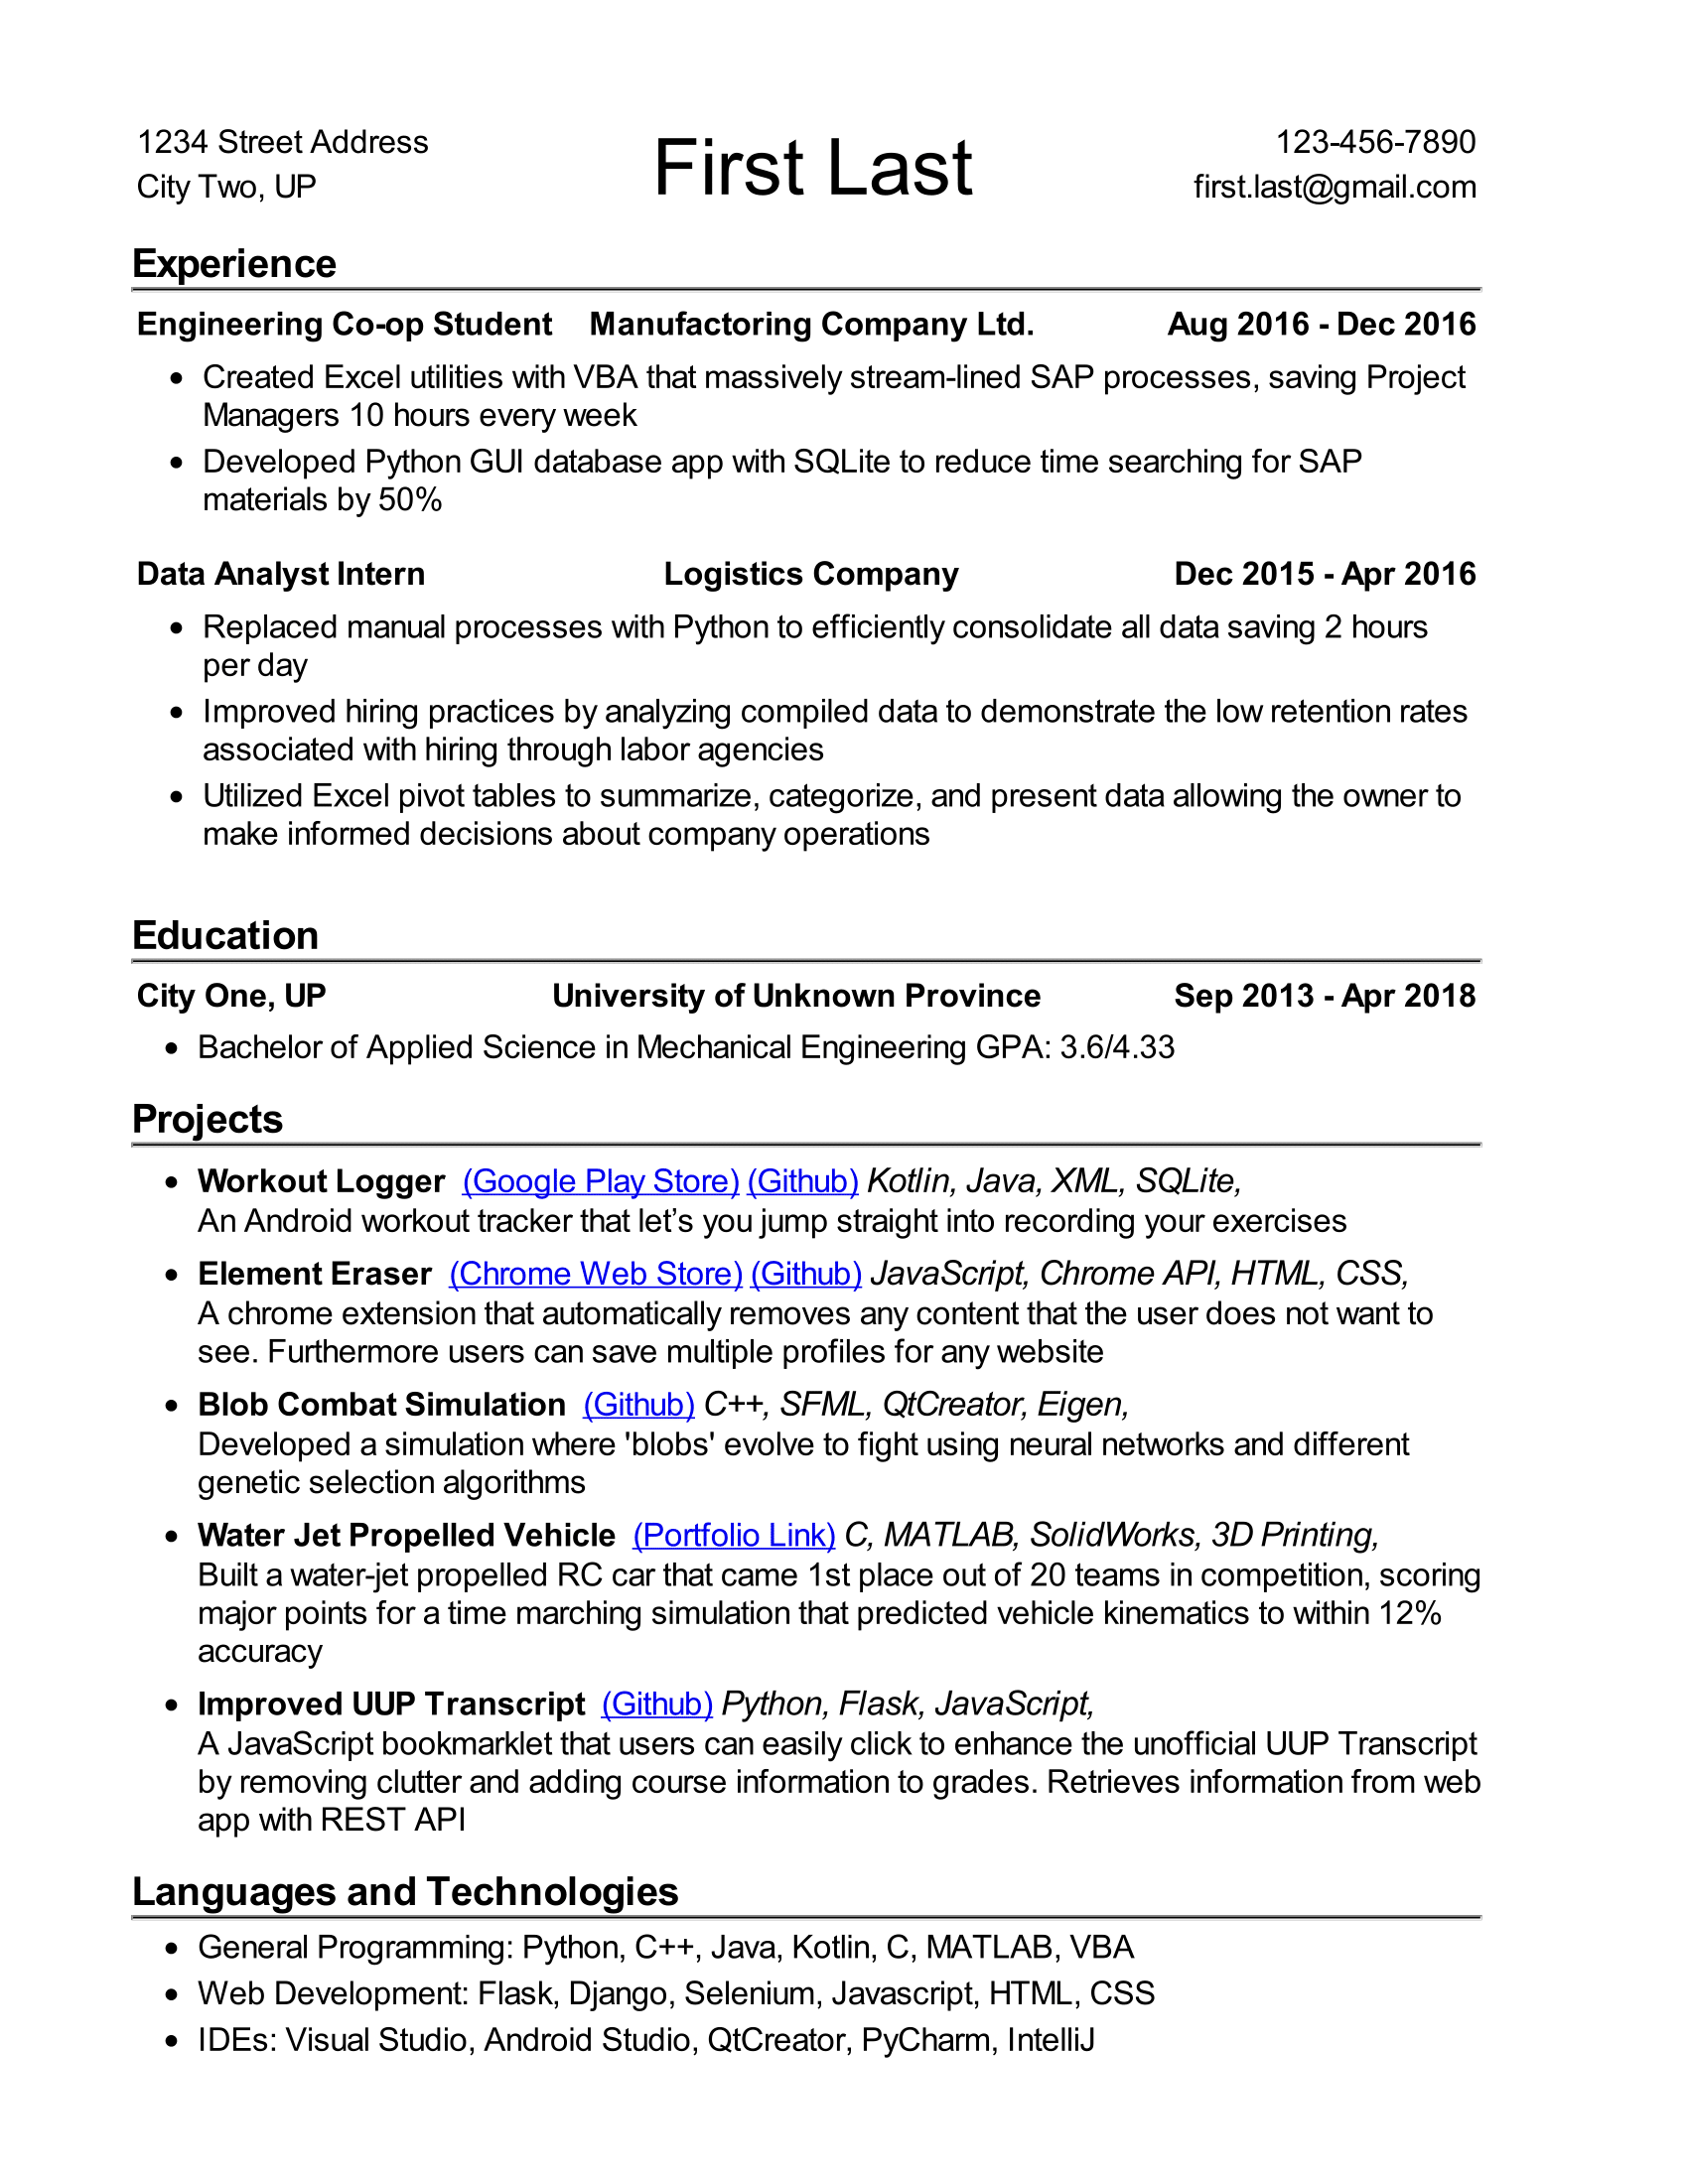 preview of resume generated